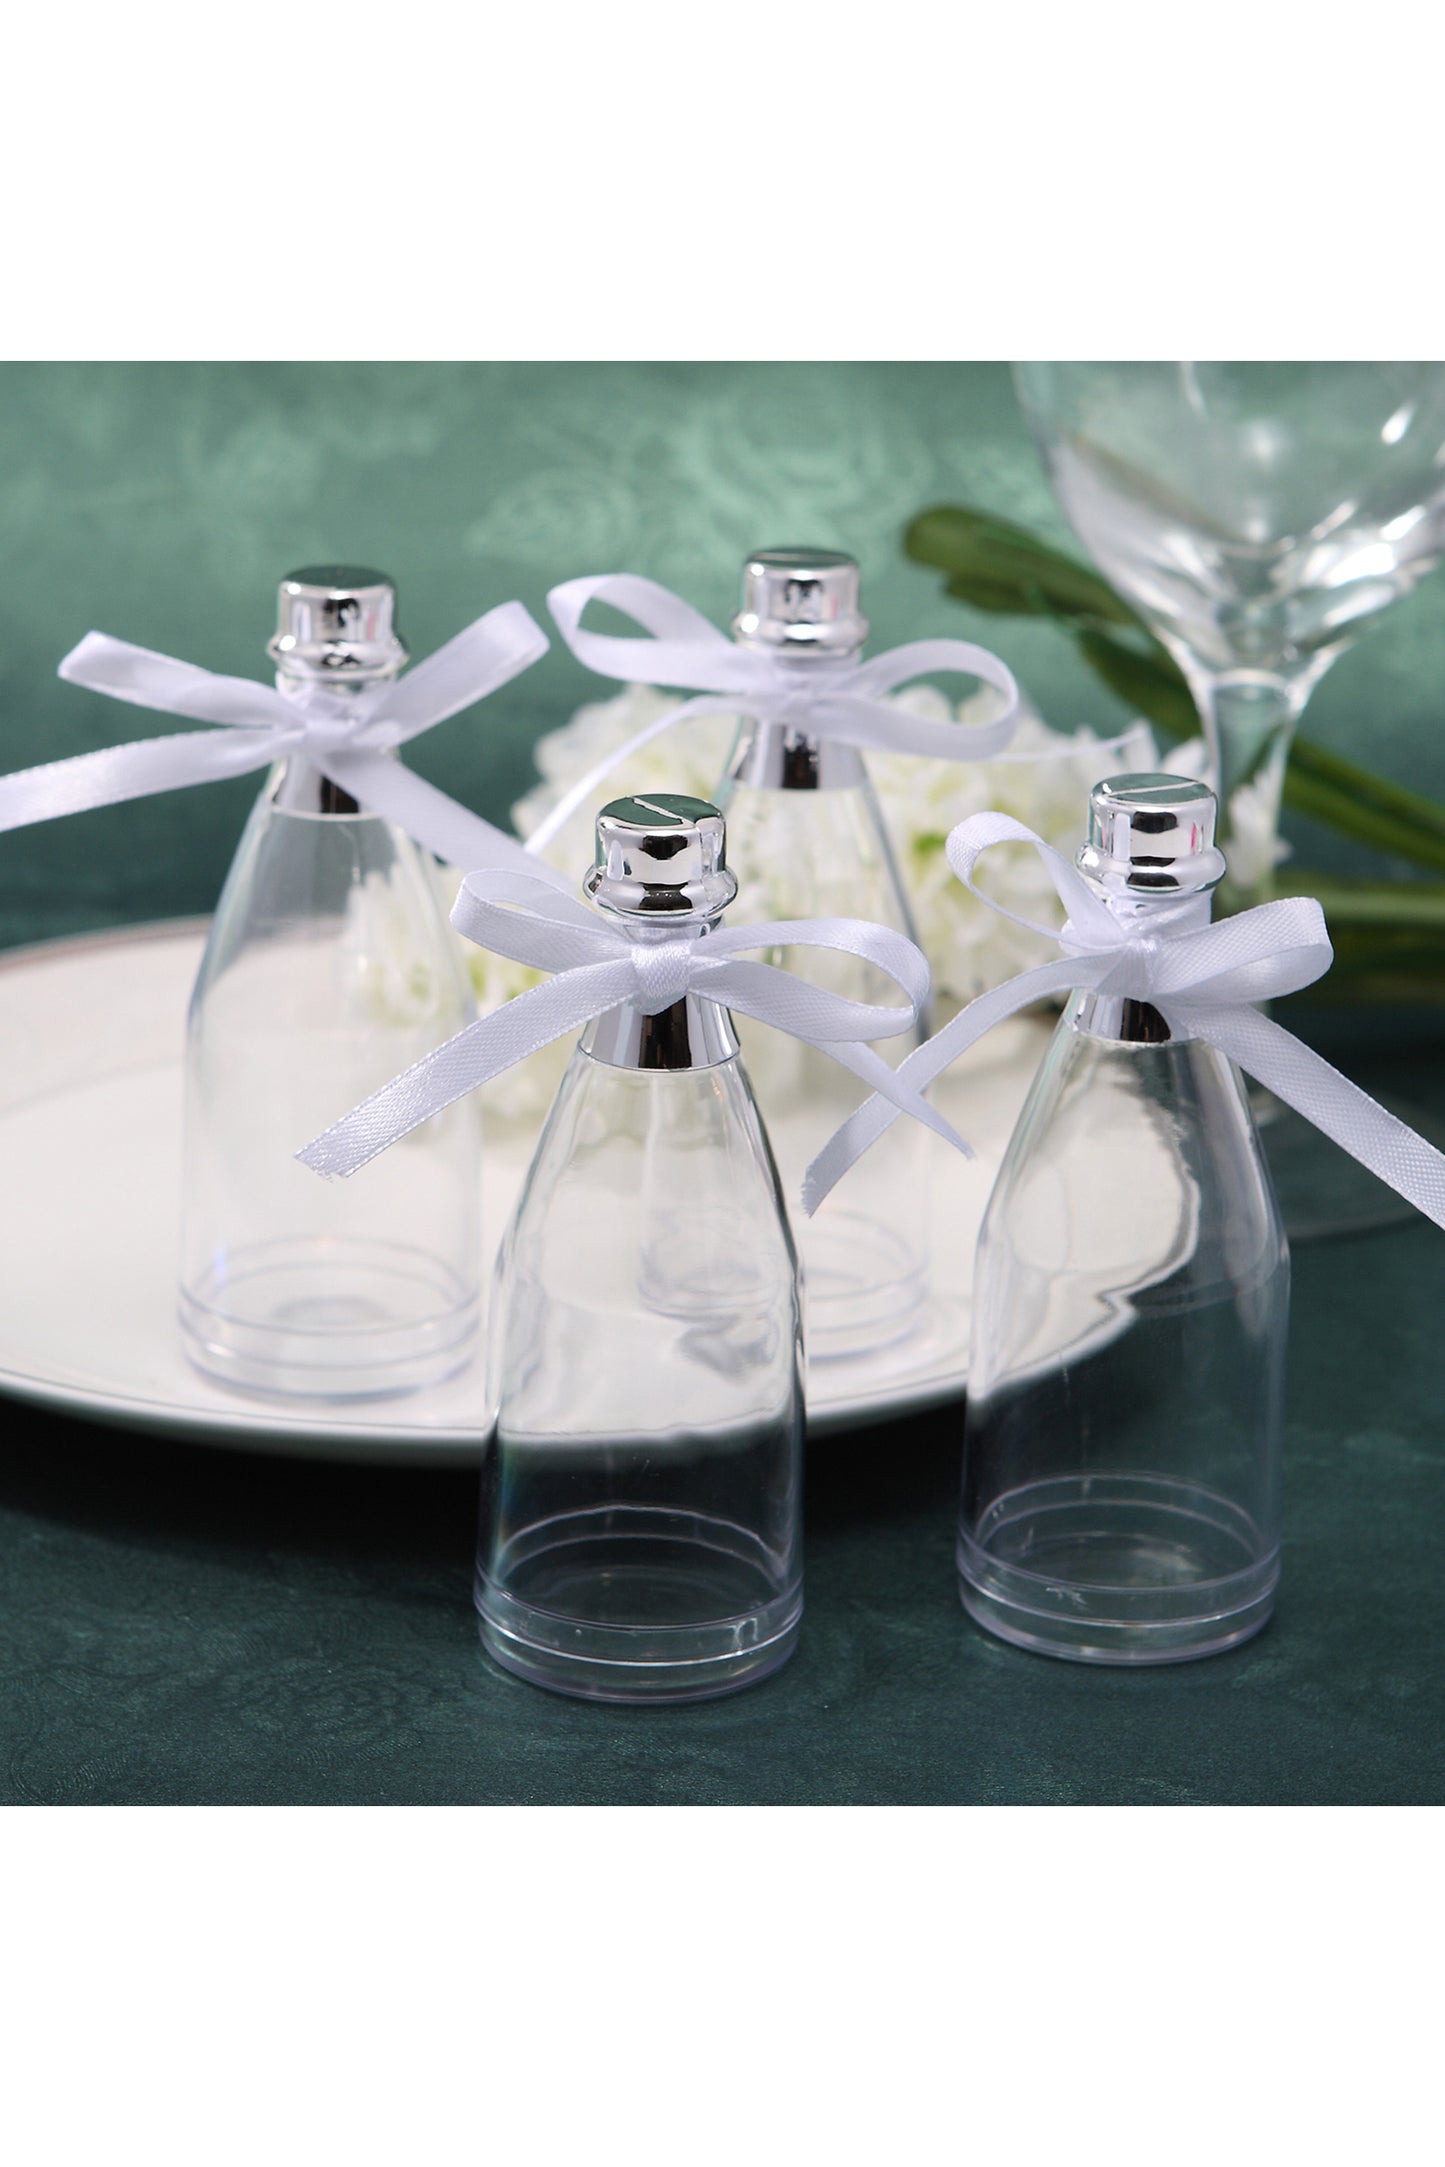 Acrylic Champagne Bottle Shaped Favors Containers Boxes Bottles Silver CGF0265 (Set of 12 pcs)